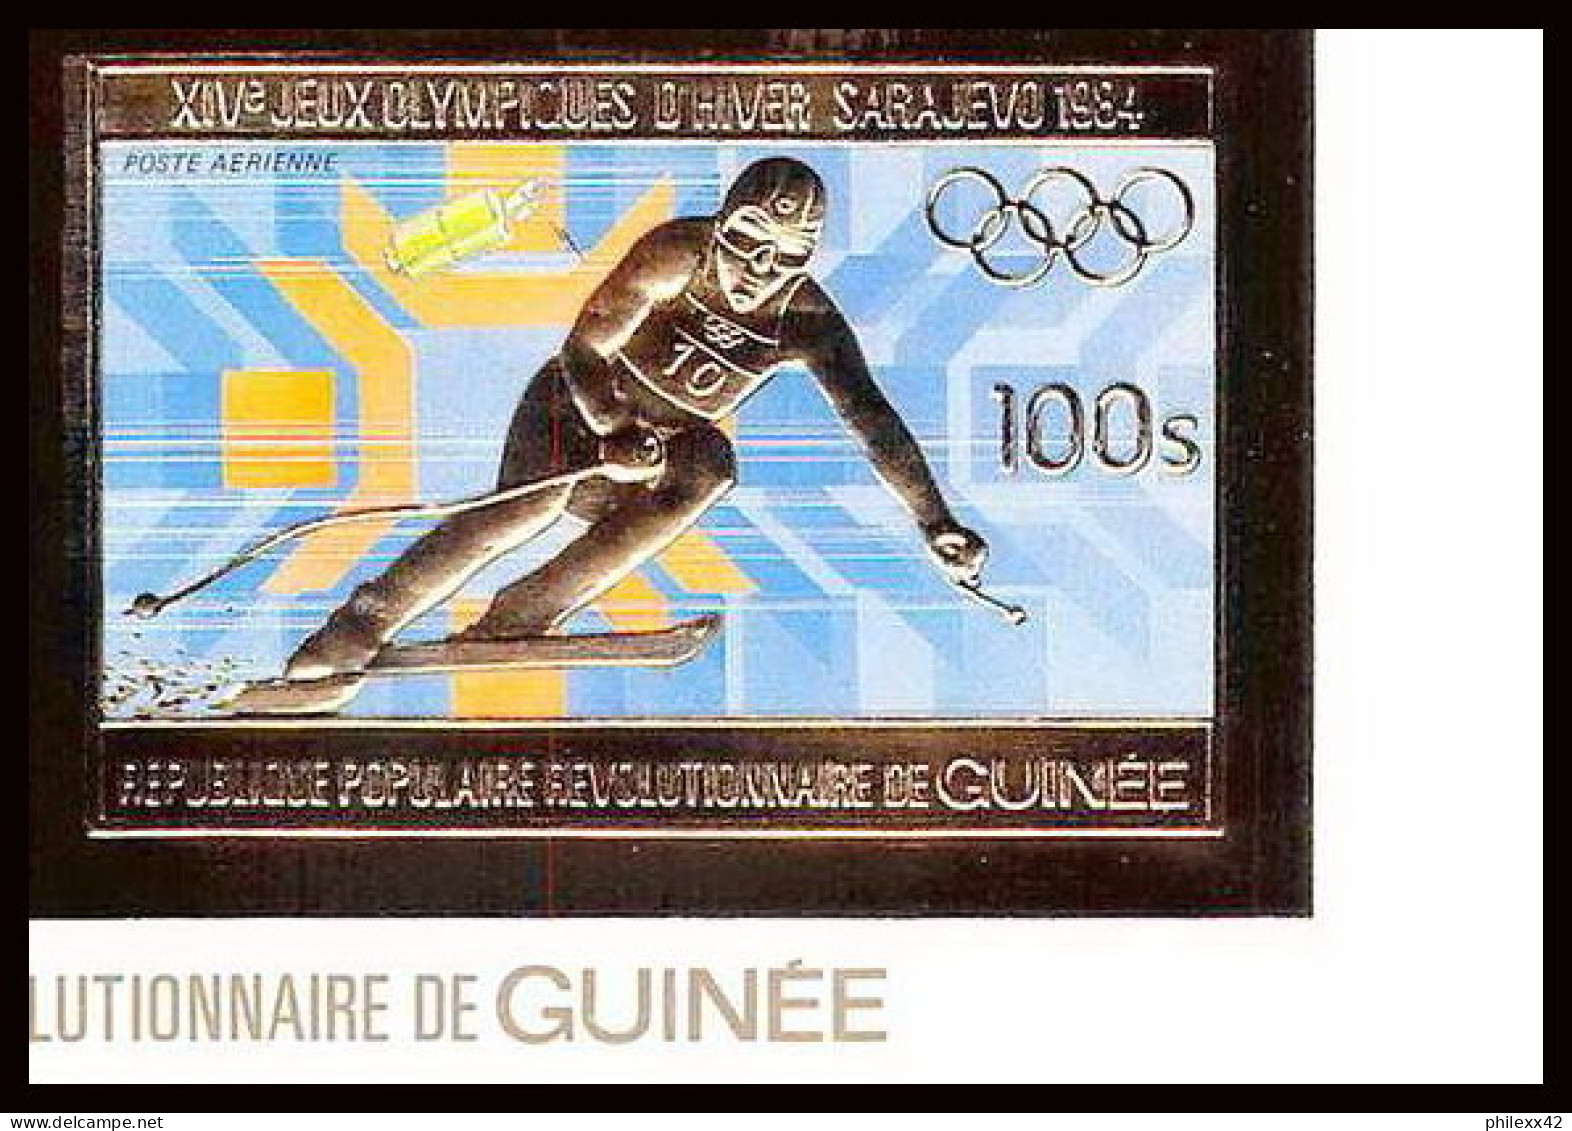 85830a/ N°971 A Sarajevo SKI 1984 Jeux Olympiques Olympic Games Guinée Guinea OR Gold Stamps ** MNH - Winter 1984: Sarajevo